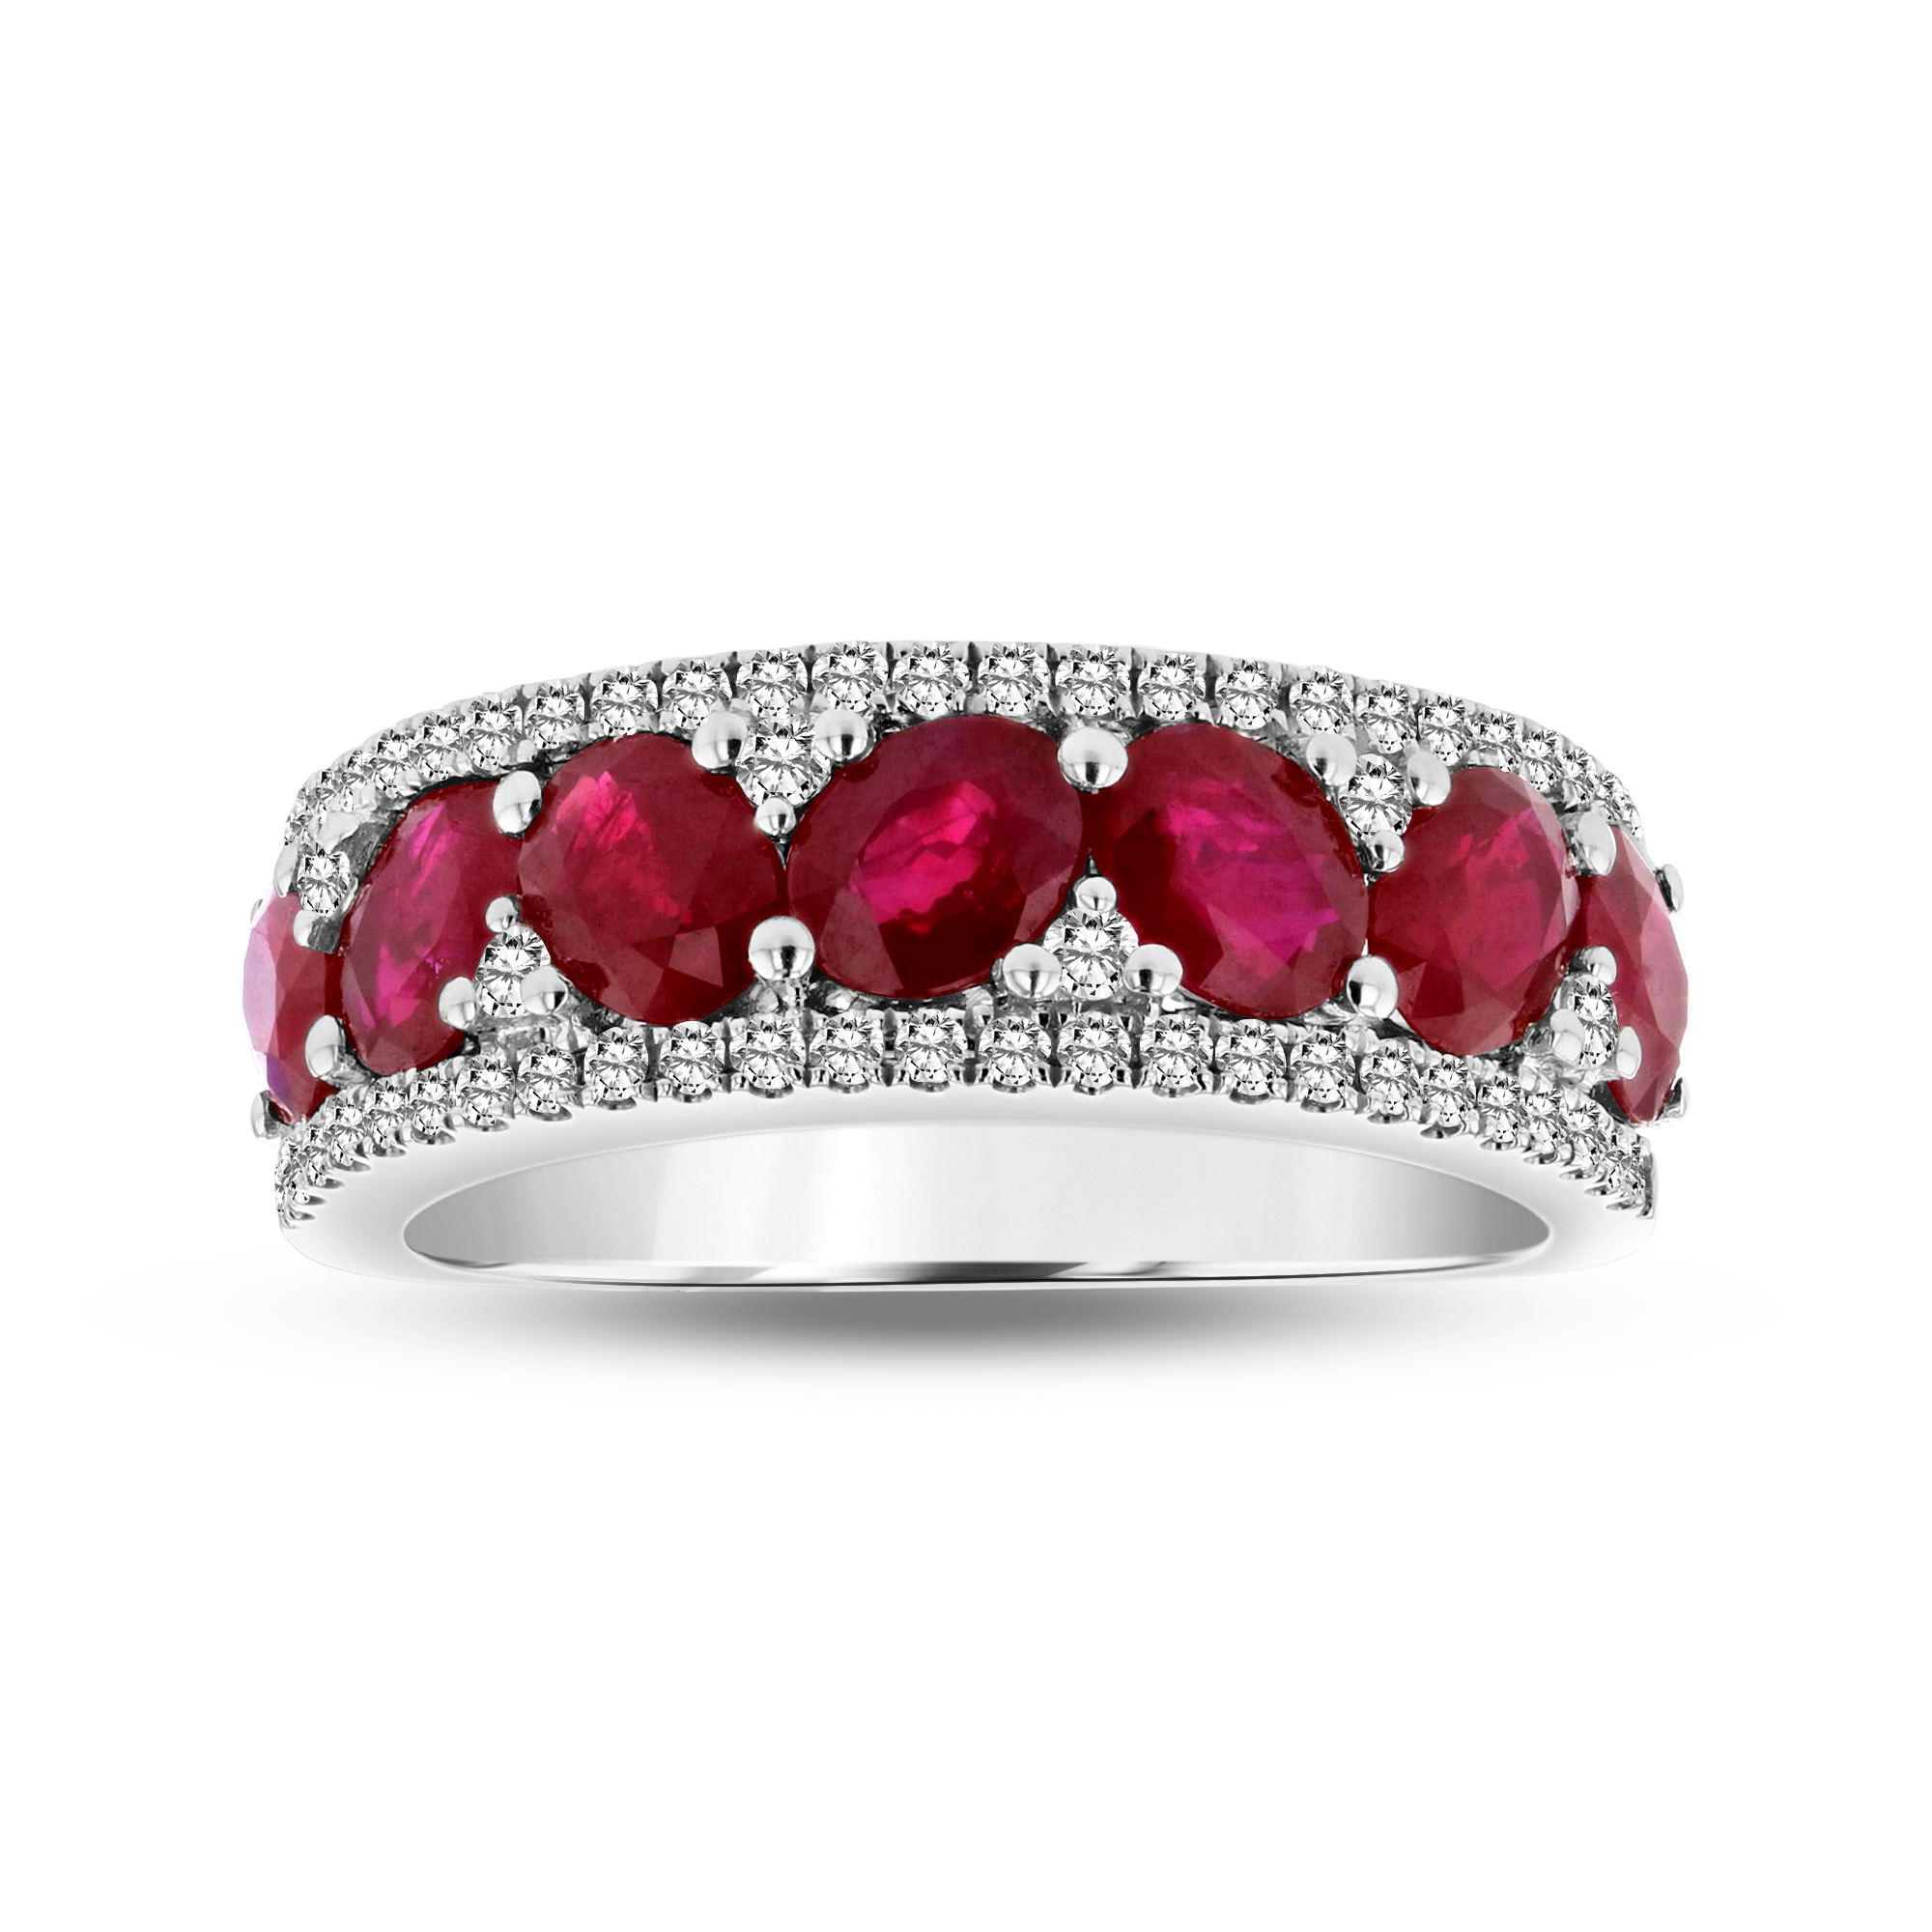 View 3.04ctw Diamond and Ruby RIng in 18k White Gold